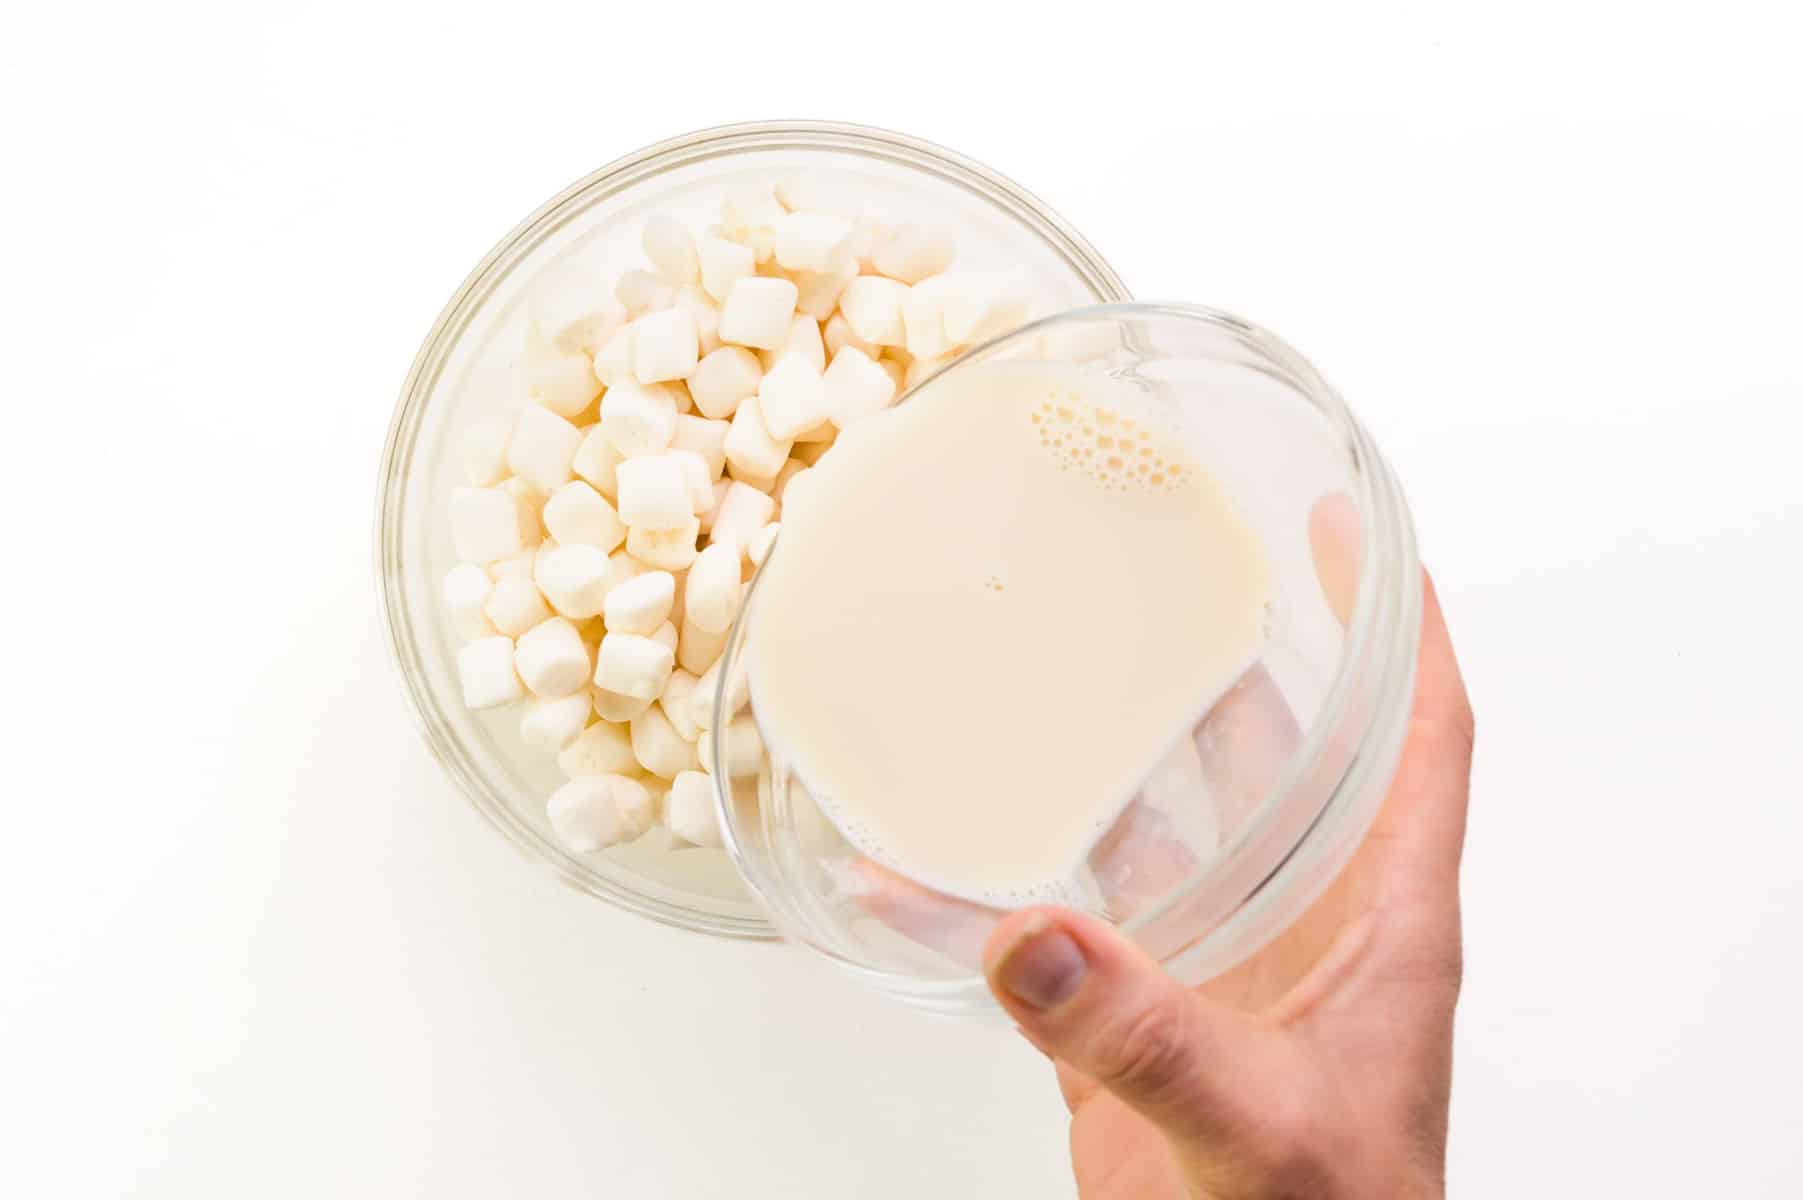 A hand holds a bowl of soy milk, pouring it into a bowl of marshmallows.